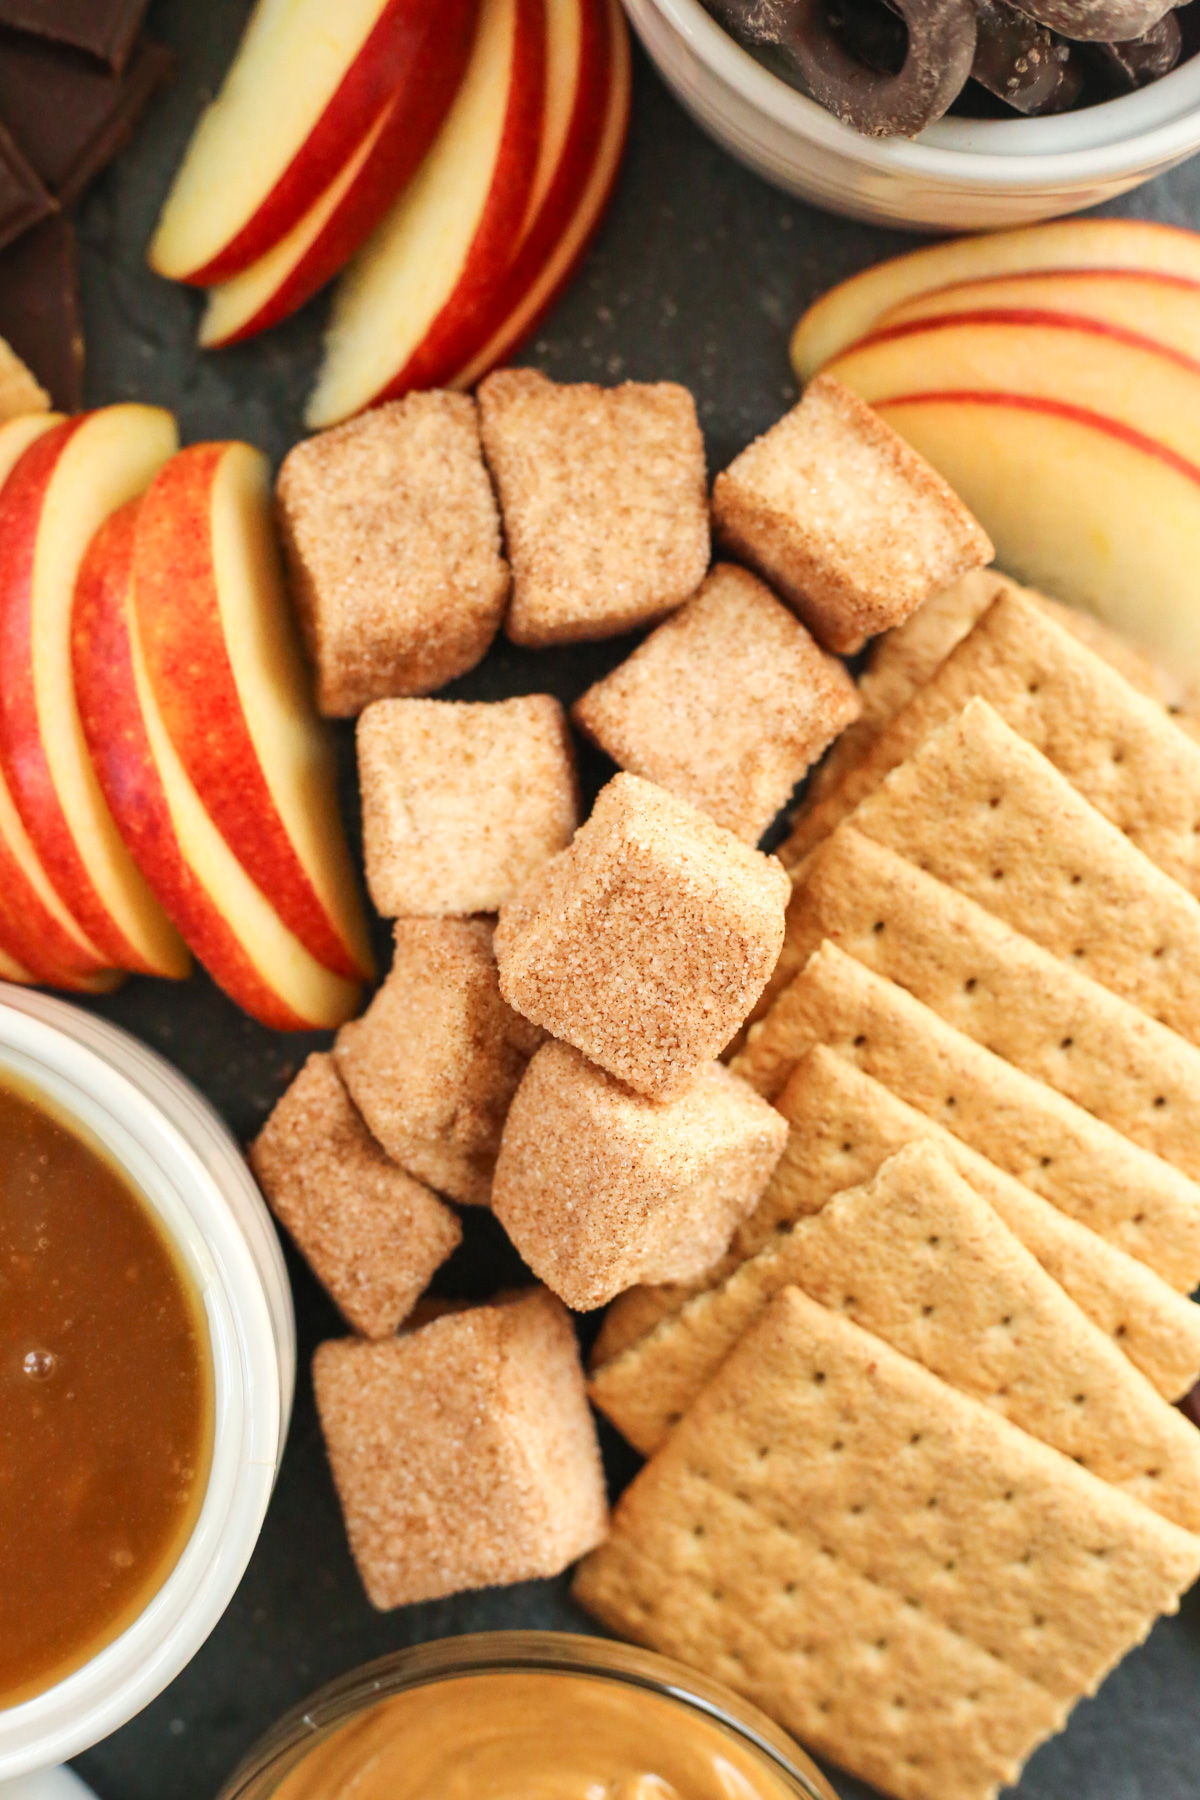 Close up overhead shot of small square marshmallows, dusted and coated with cinnamon sugar, alongside graham cracker squares, sliced apples, and a small ramekin of caramel sauce